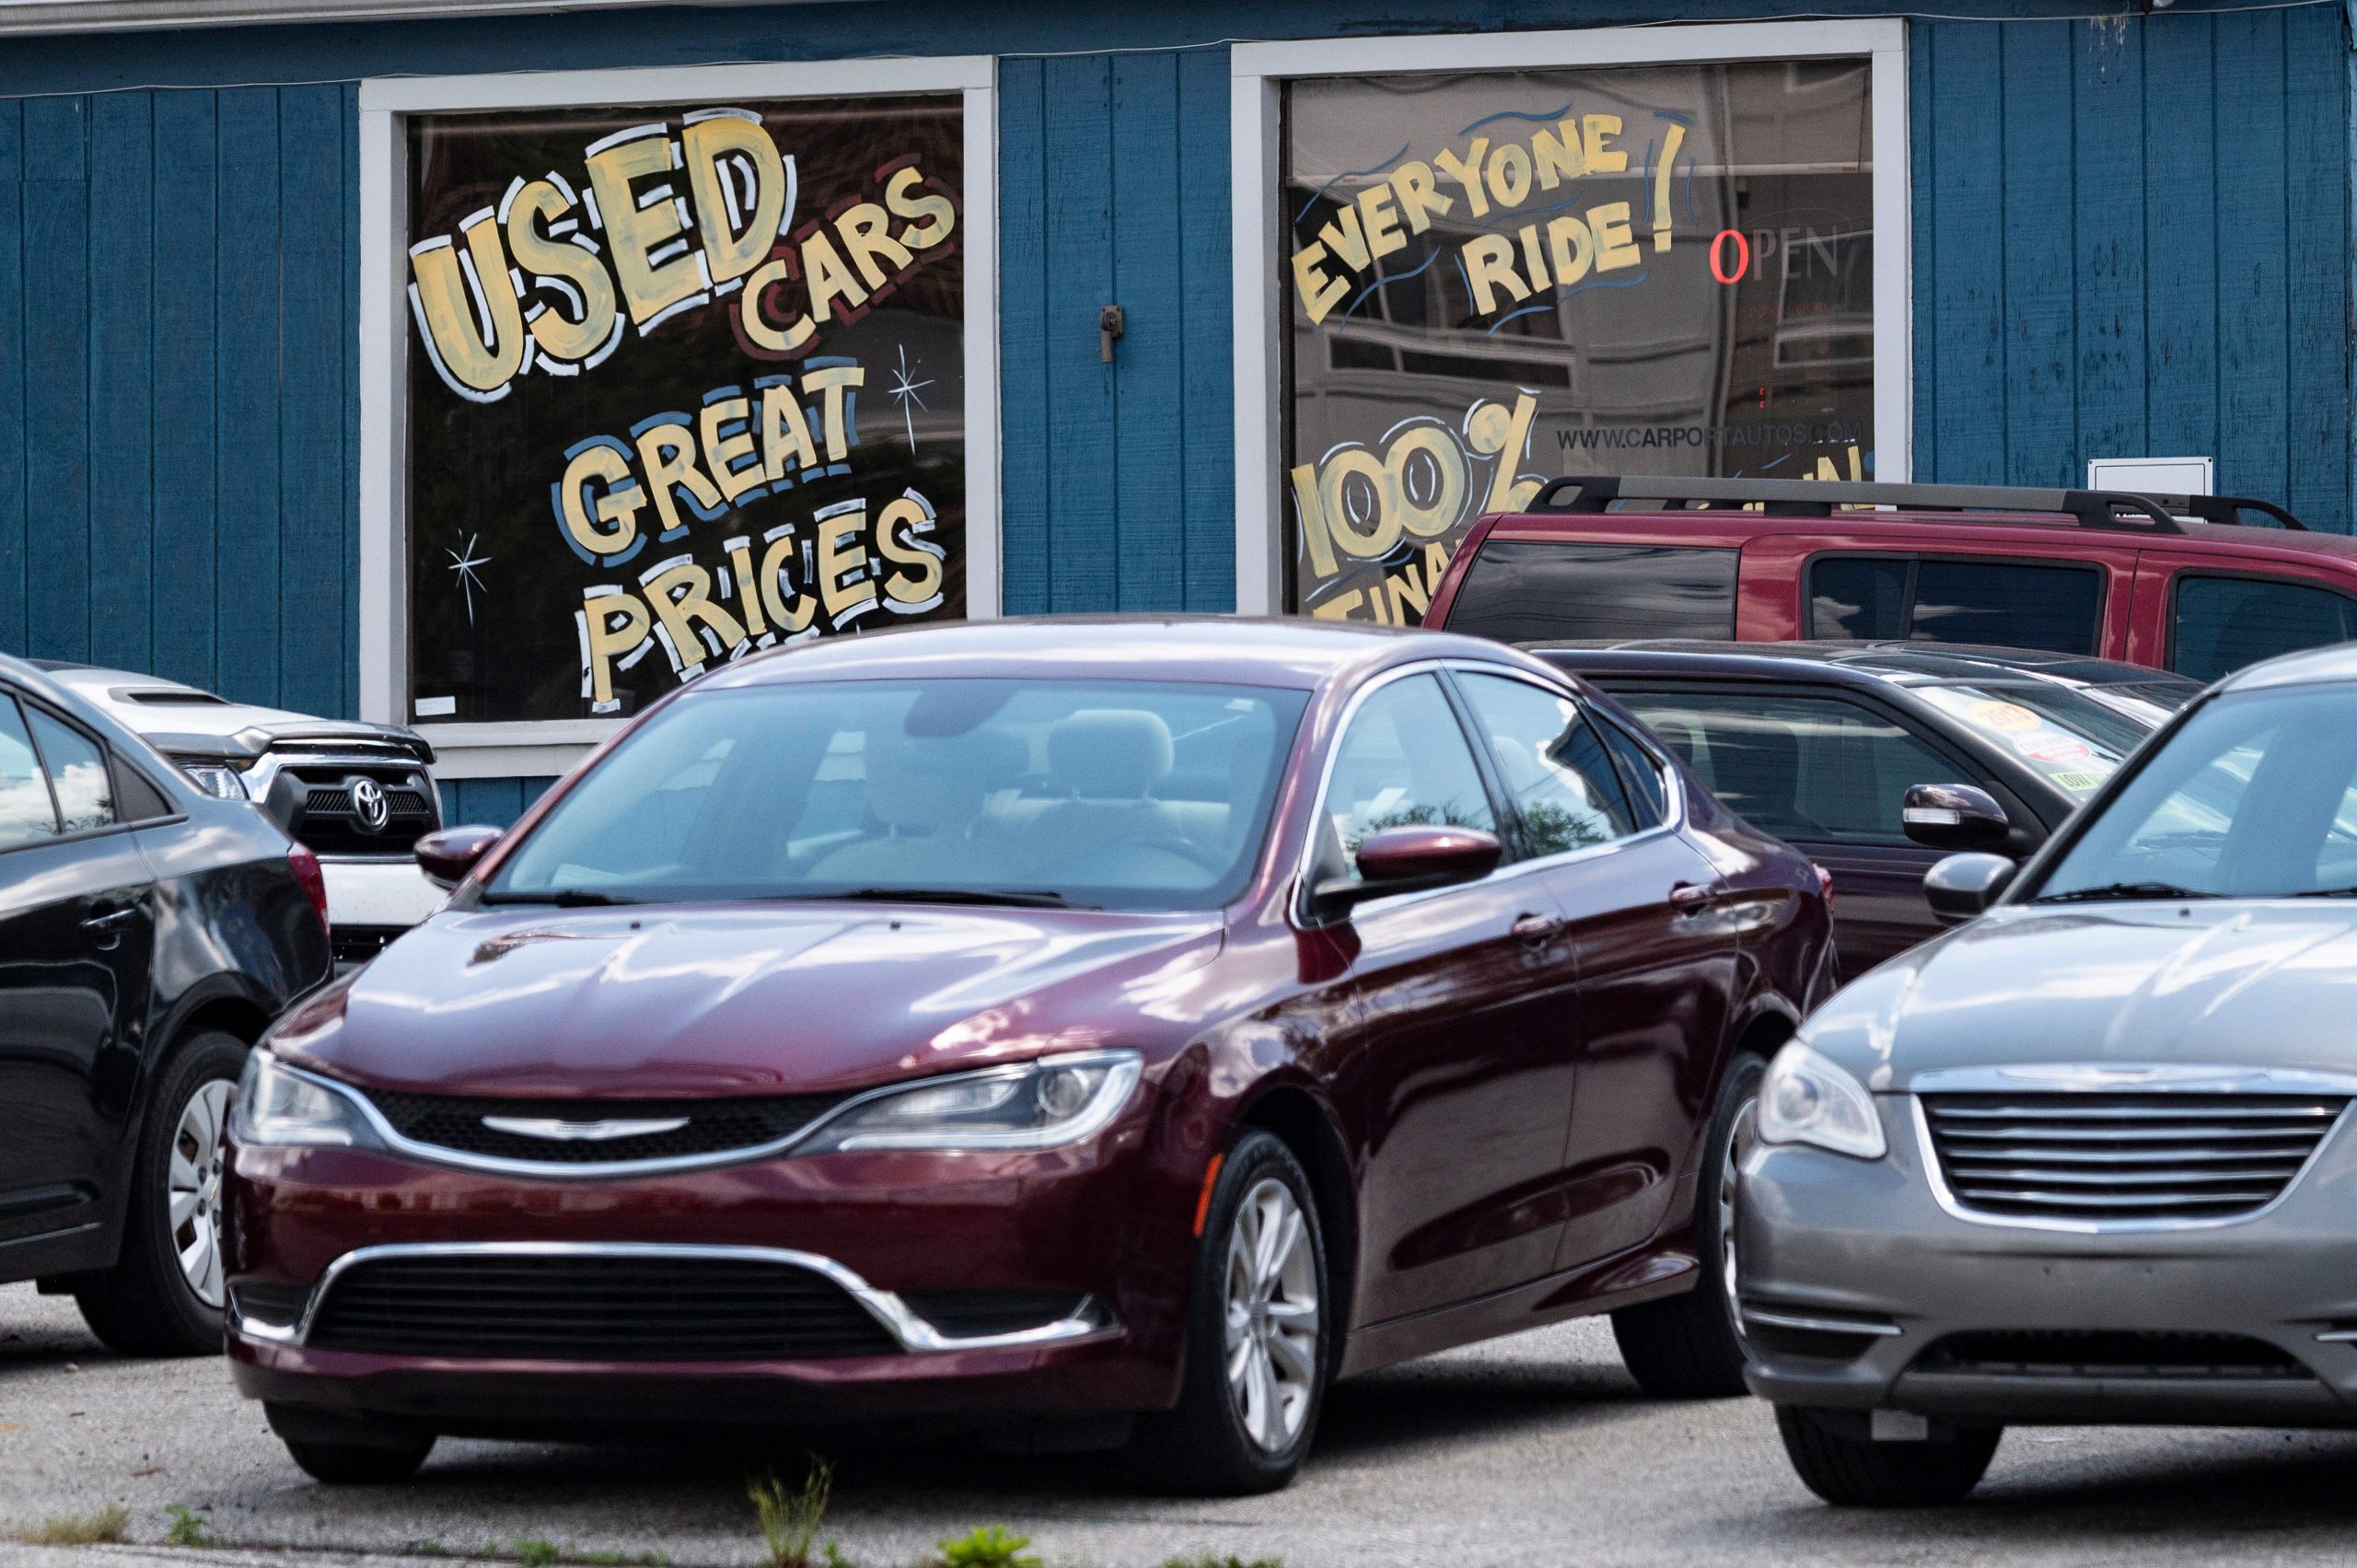 Cars sit outside a used car dealership with spray paint on the windows advertising the vehicles.